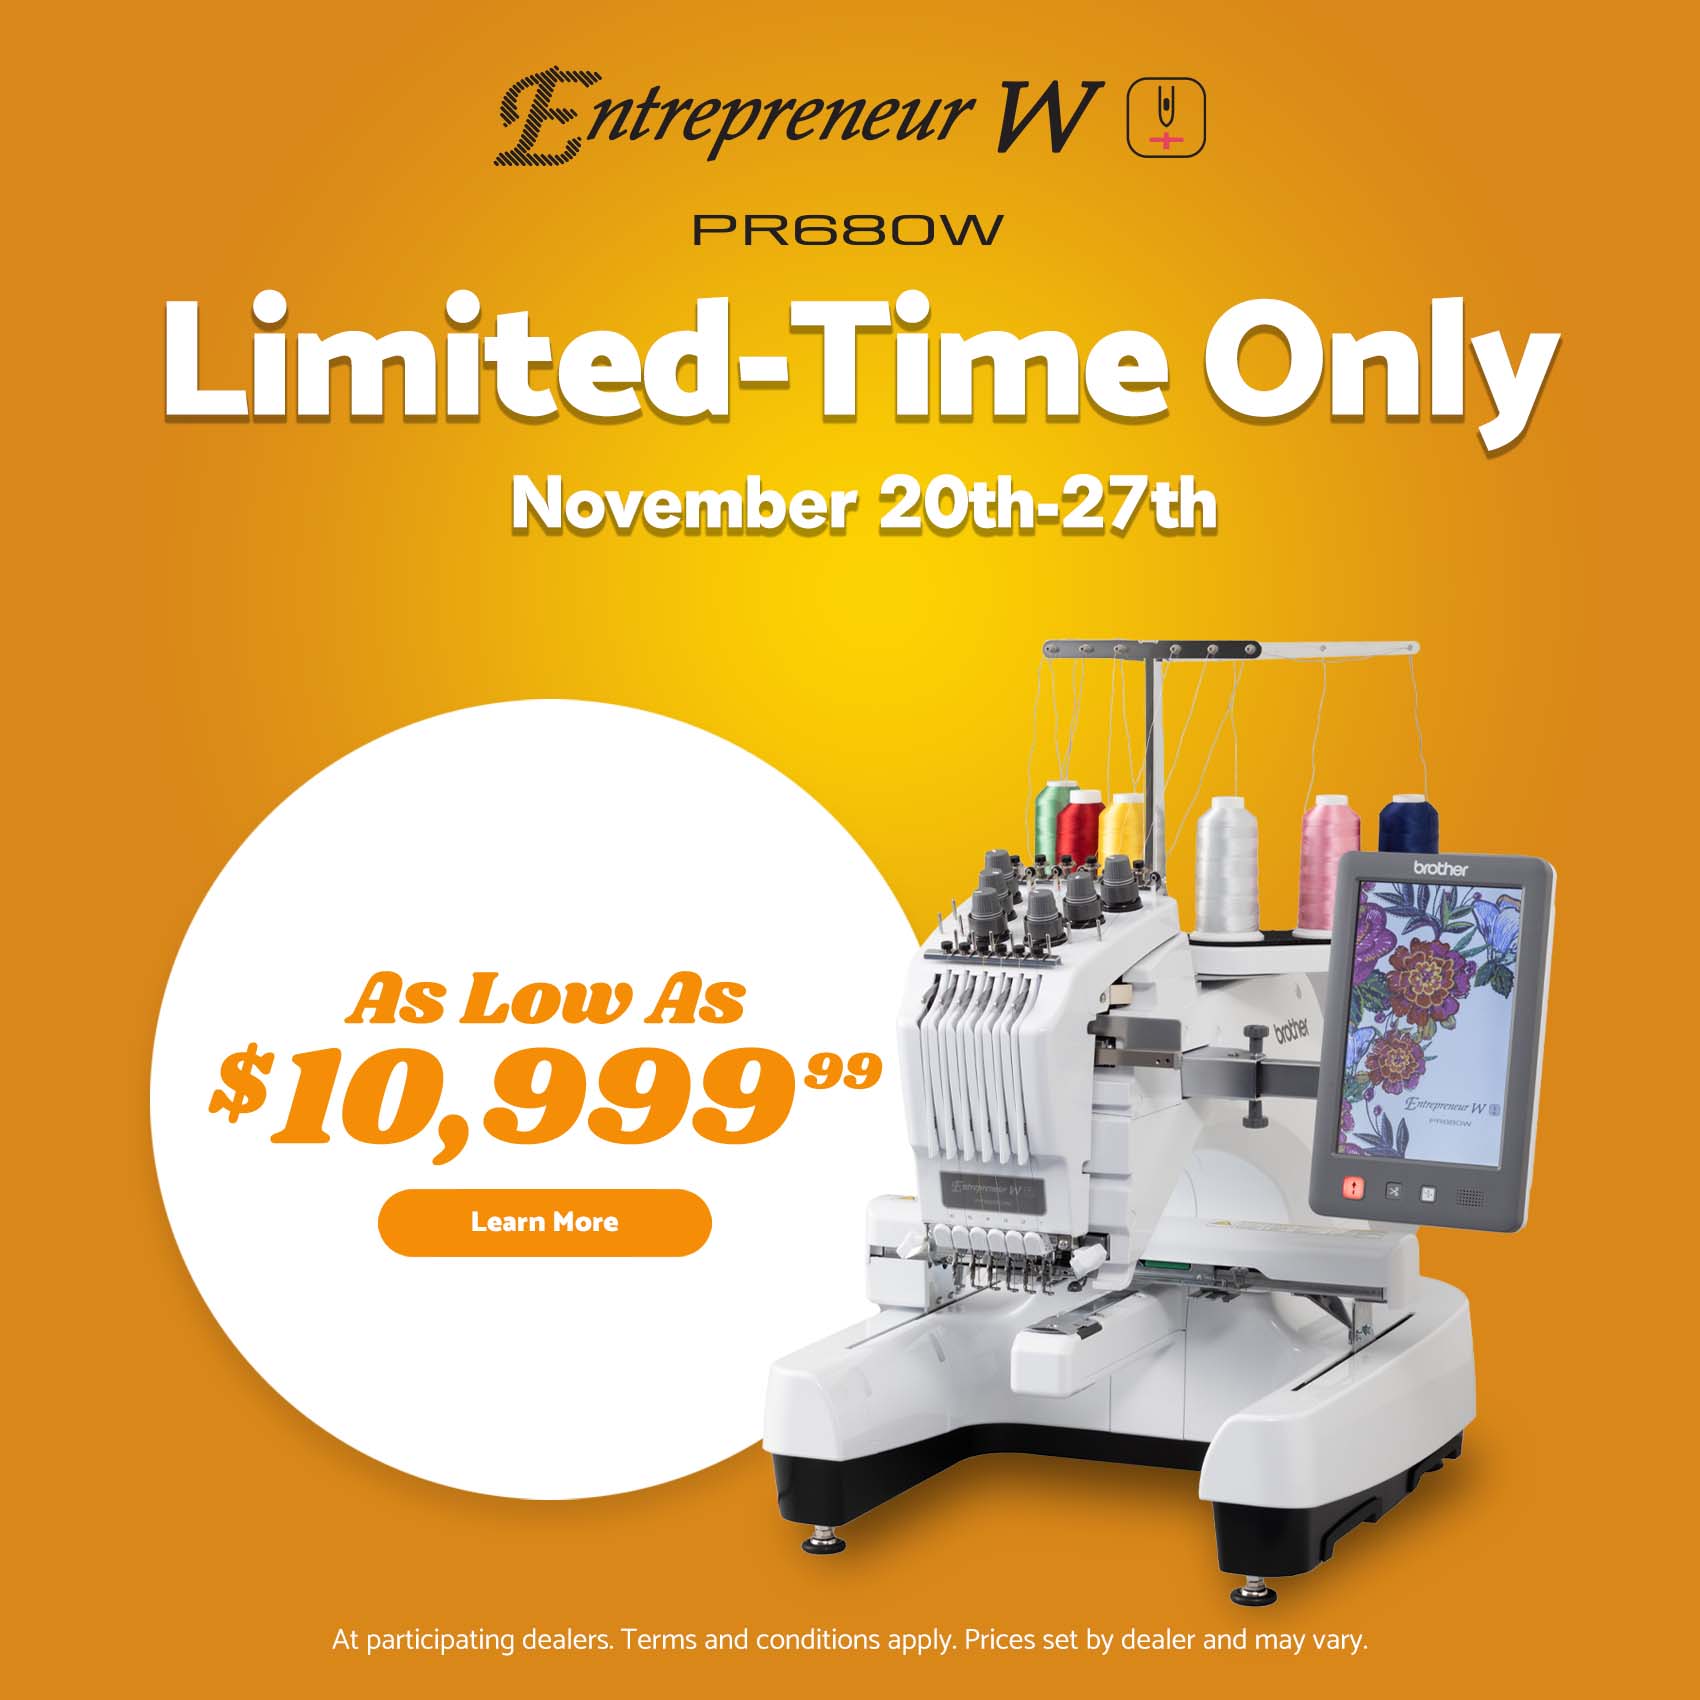 TURKEY DAY DEALS - LOWEST PRICES OF THE YEAR ON BROTHER MACHINES!